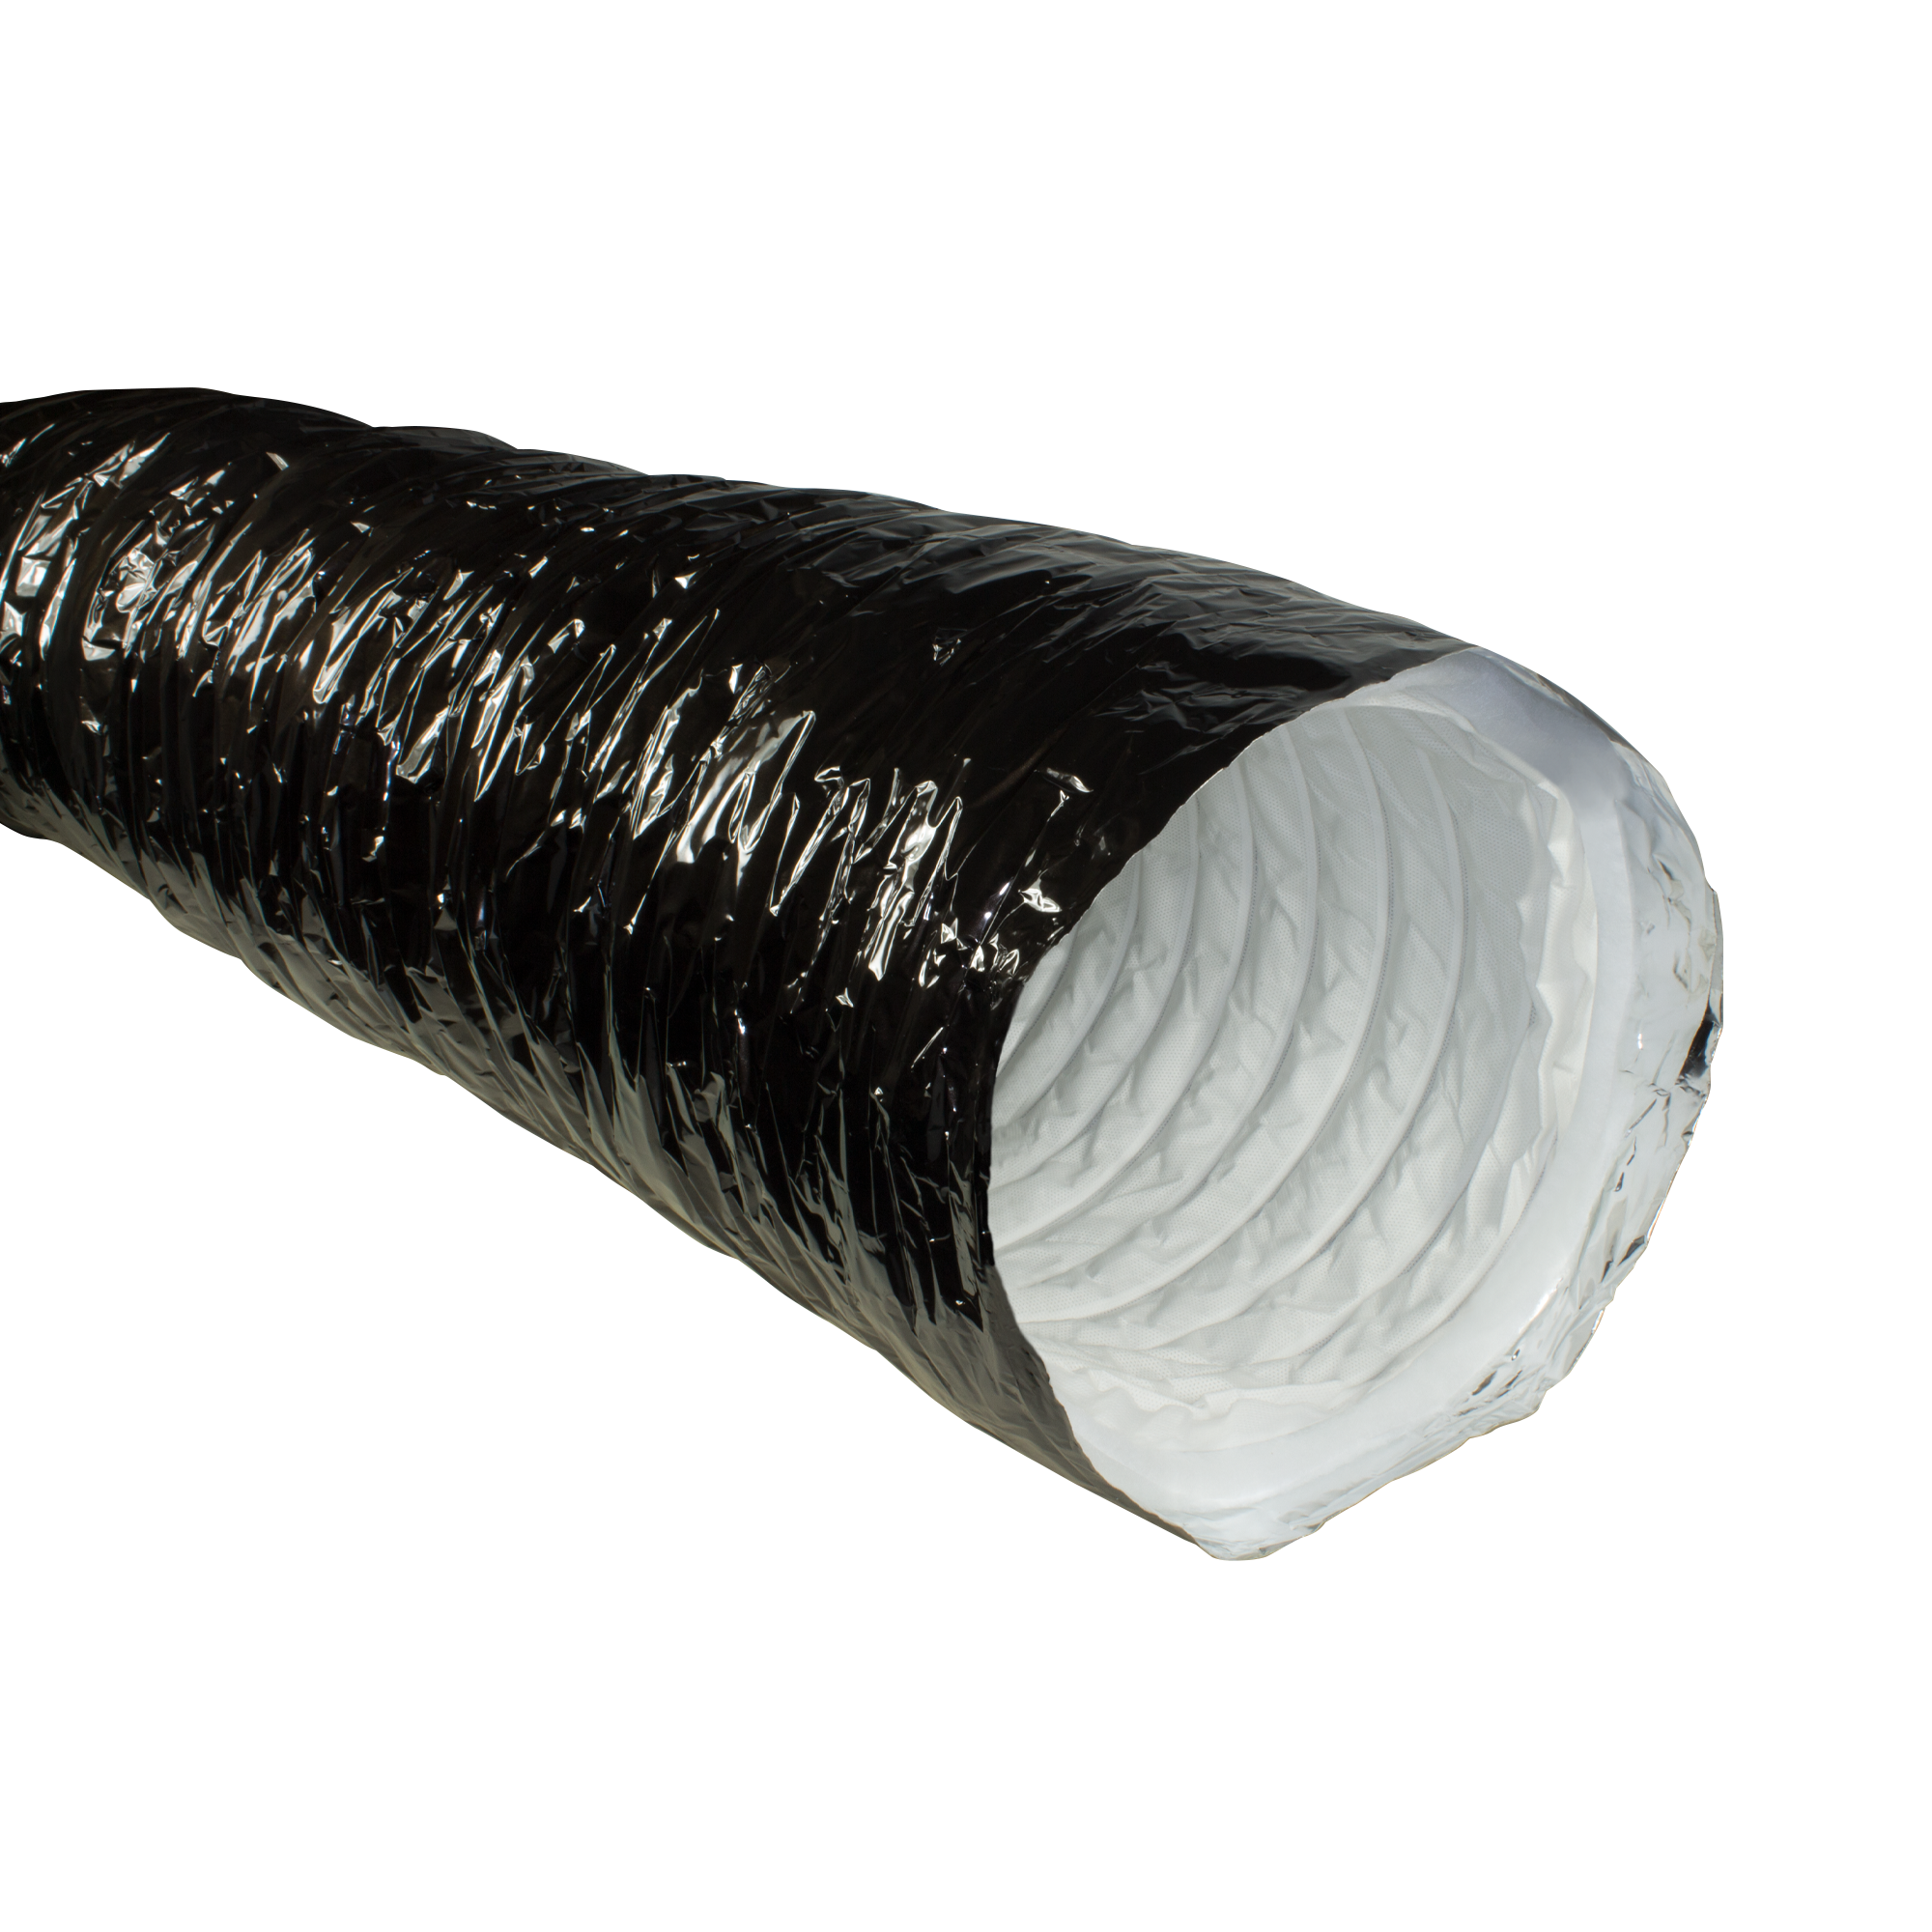 Phonic Trap ducting 6 meters long